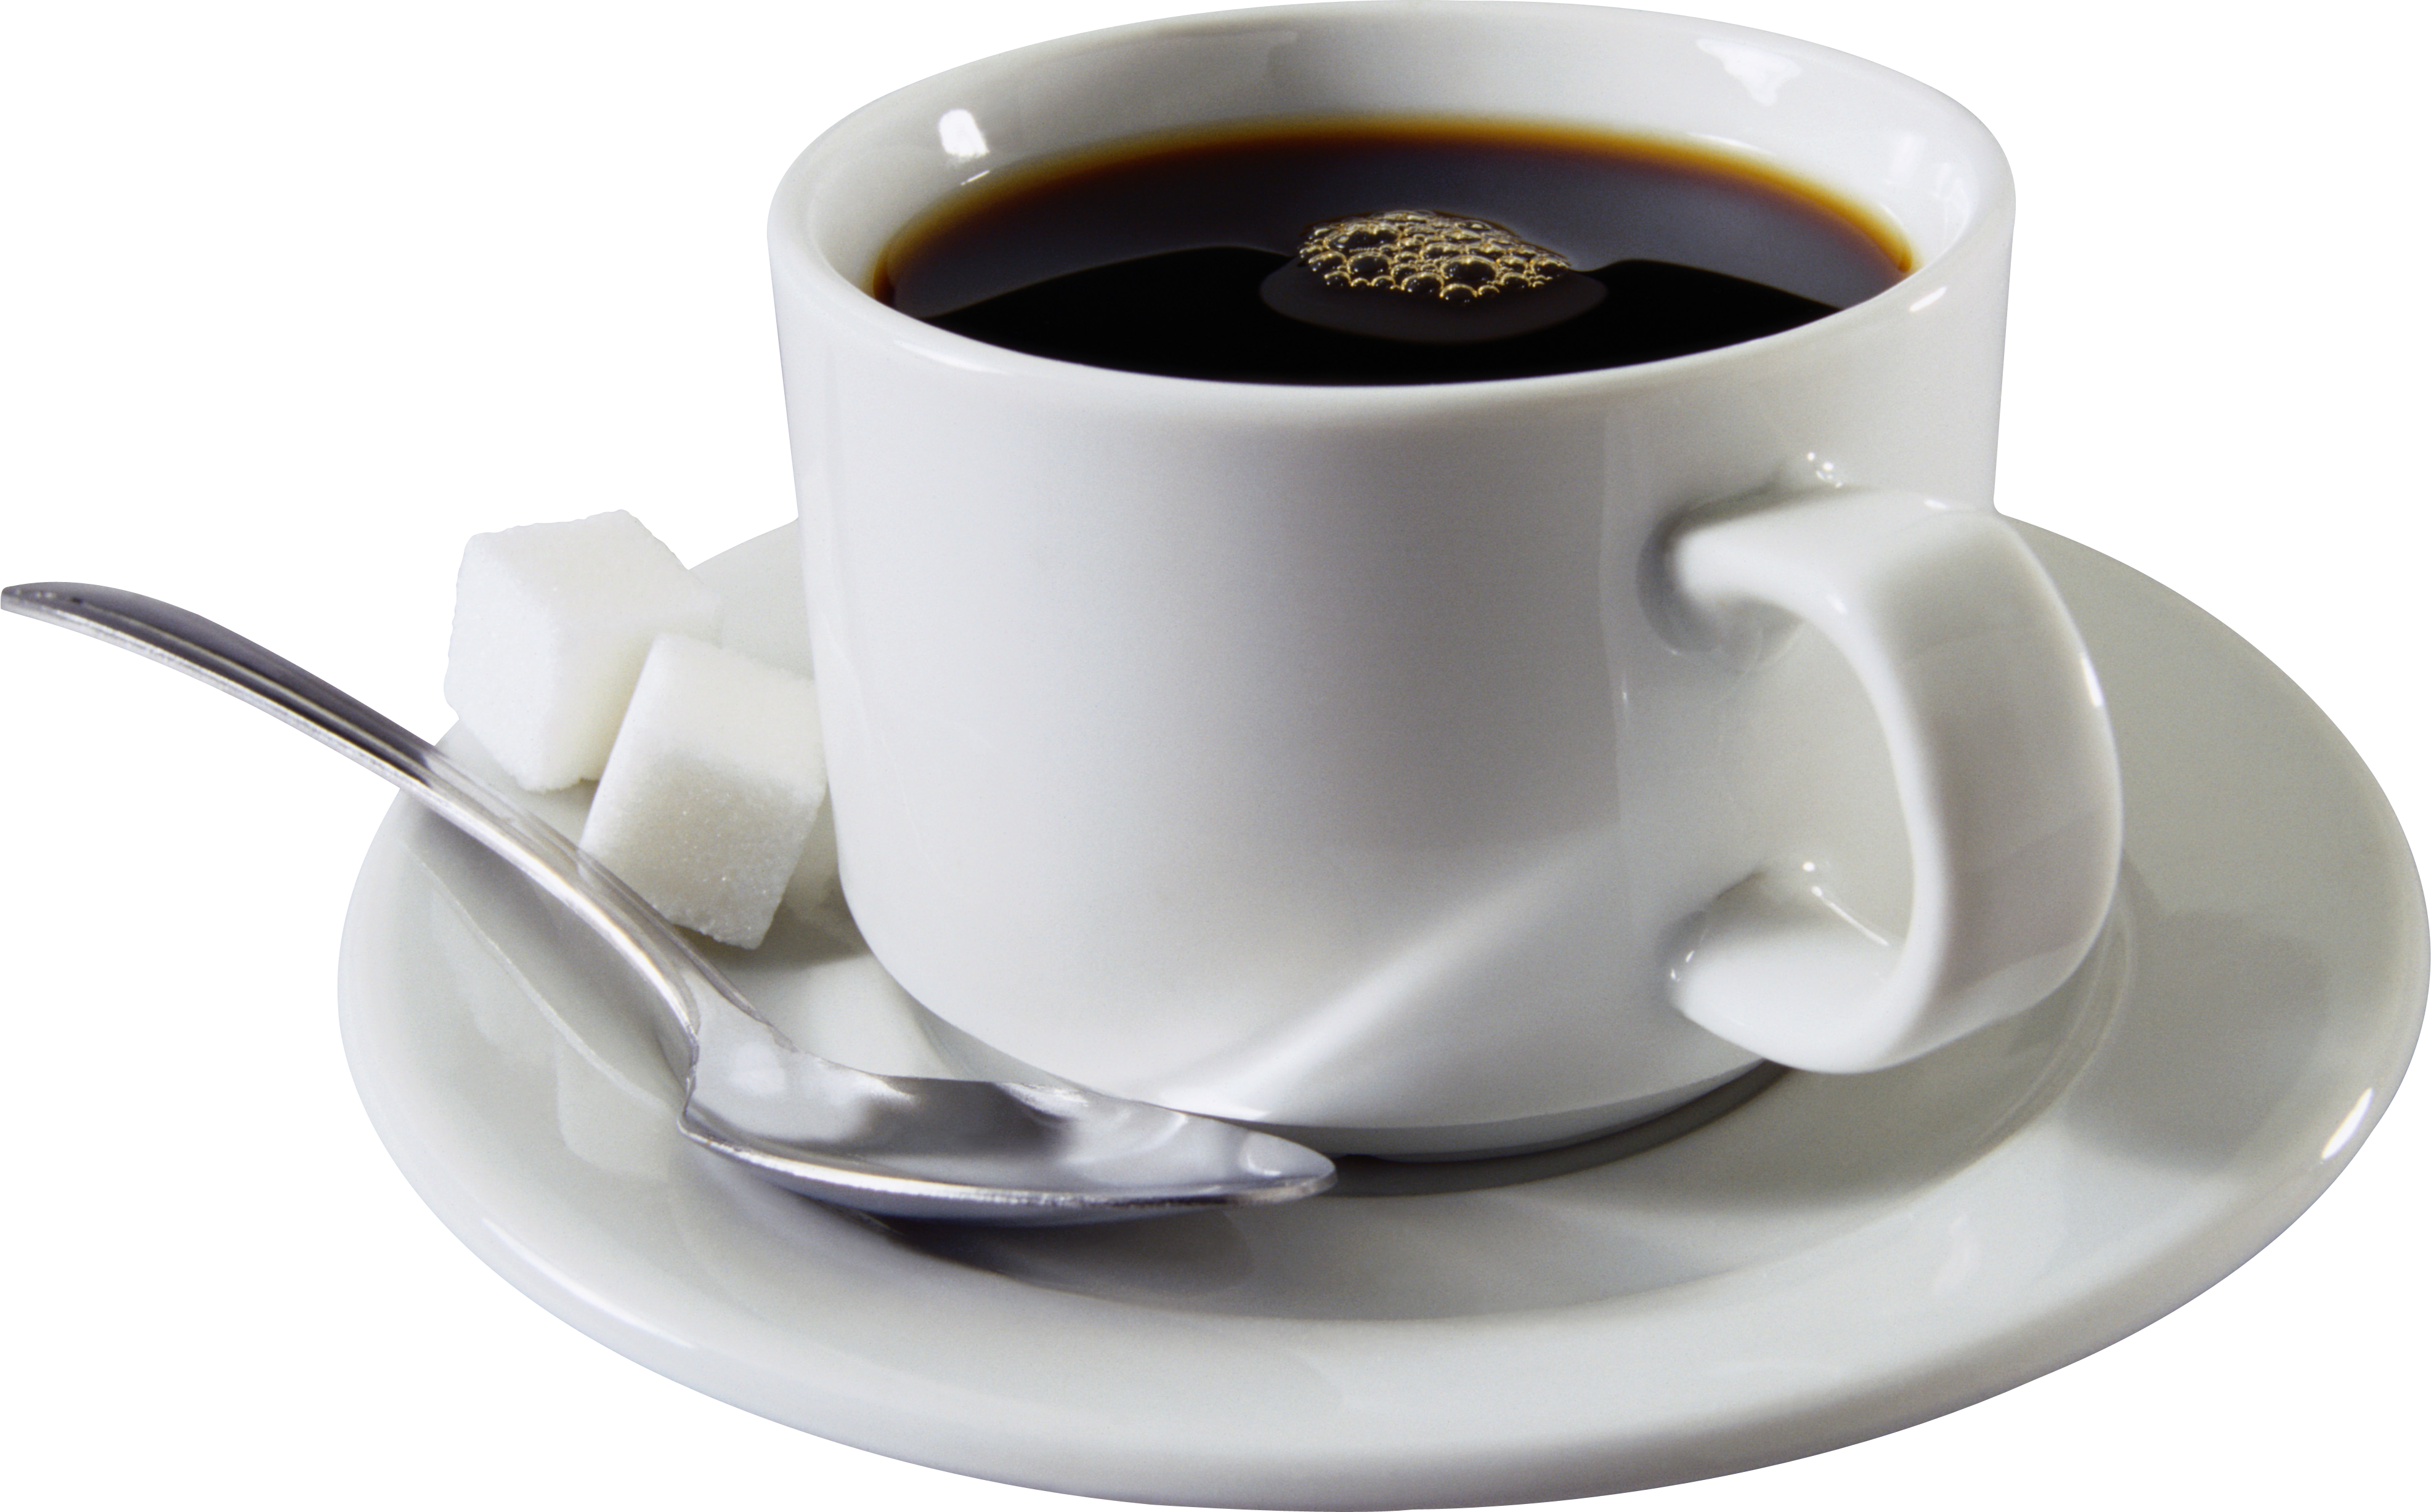 Coffee cup png images